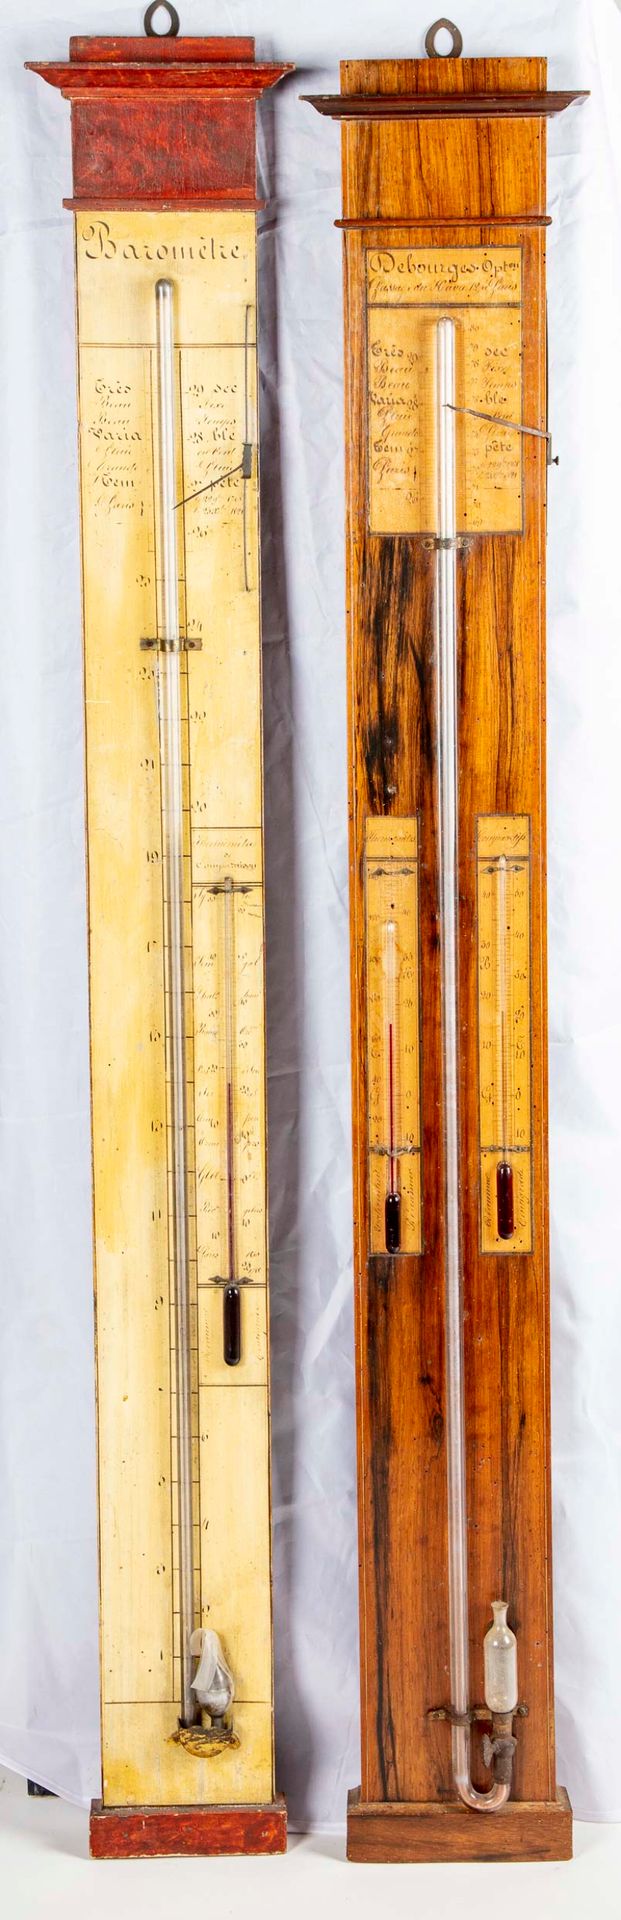 Null Two veneer barometers

One of the two signed DEBOURGES passage du Havre in &hellip;